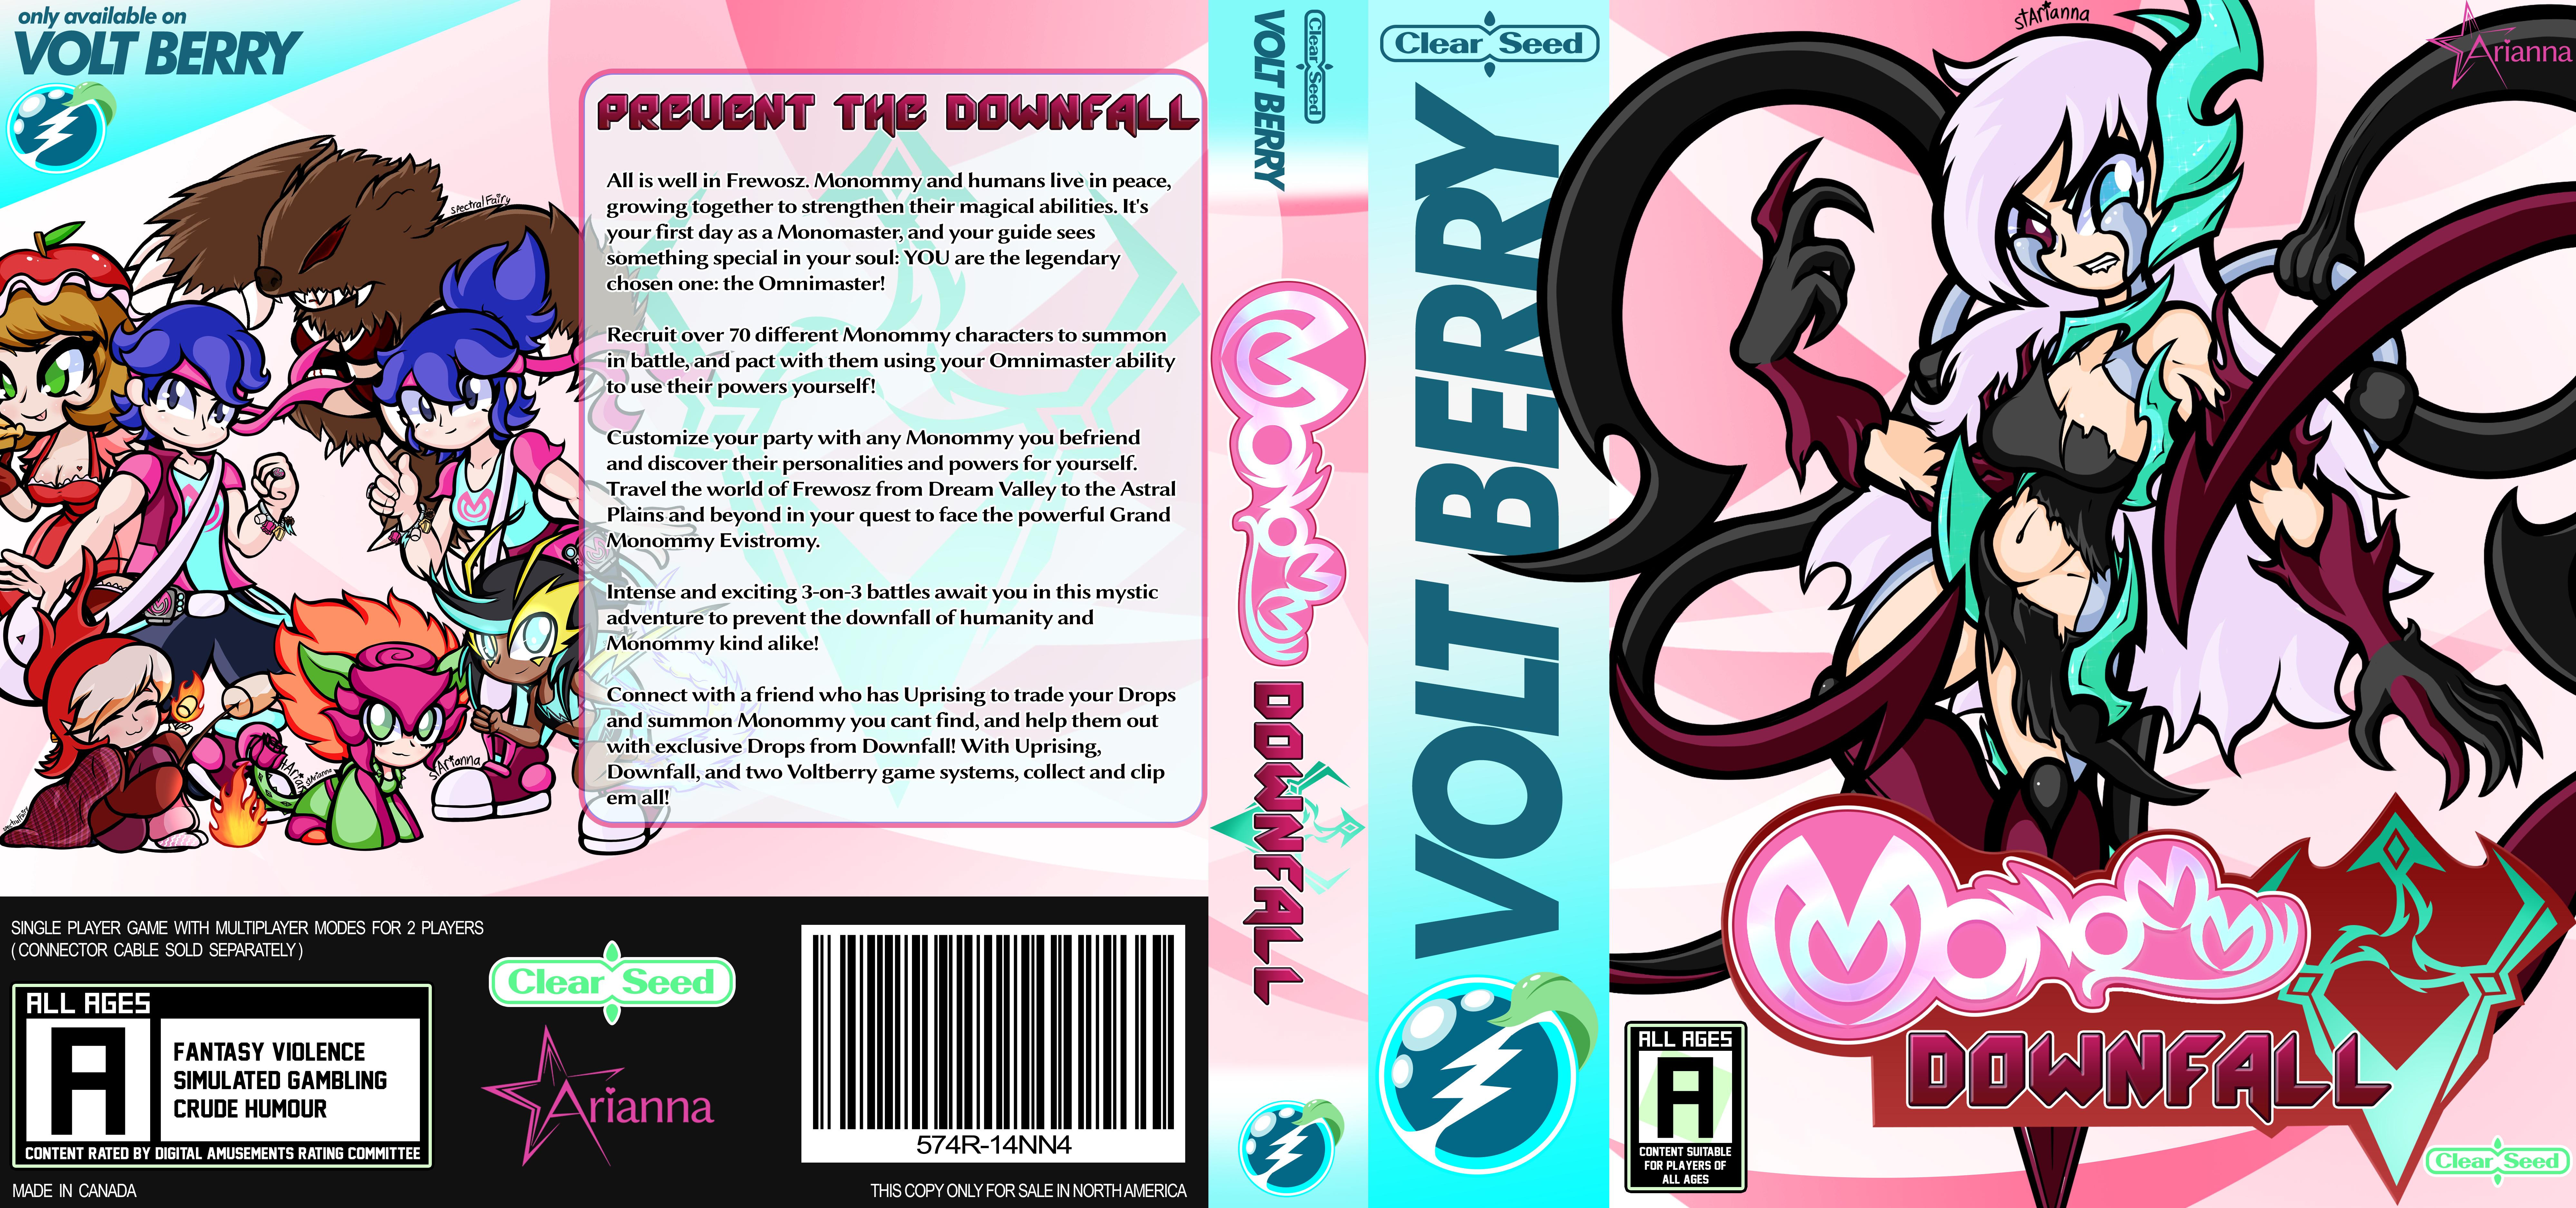 the full cover art for the Volt Berry game Monommy Downfall